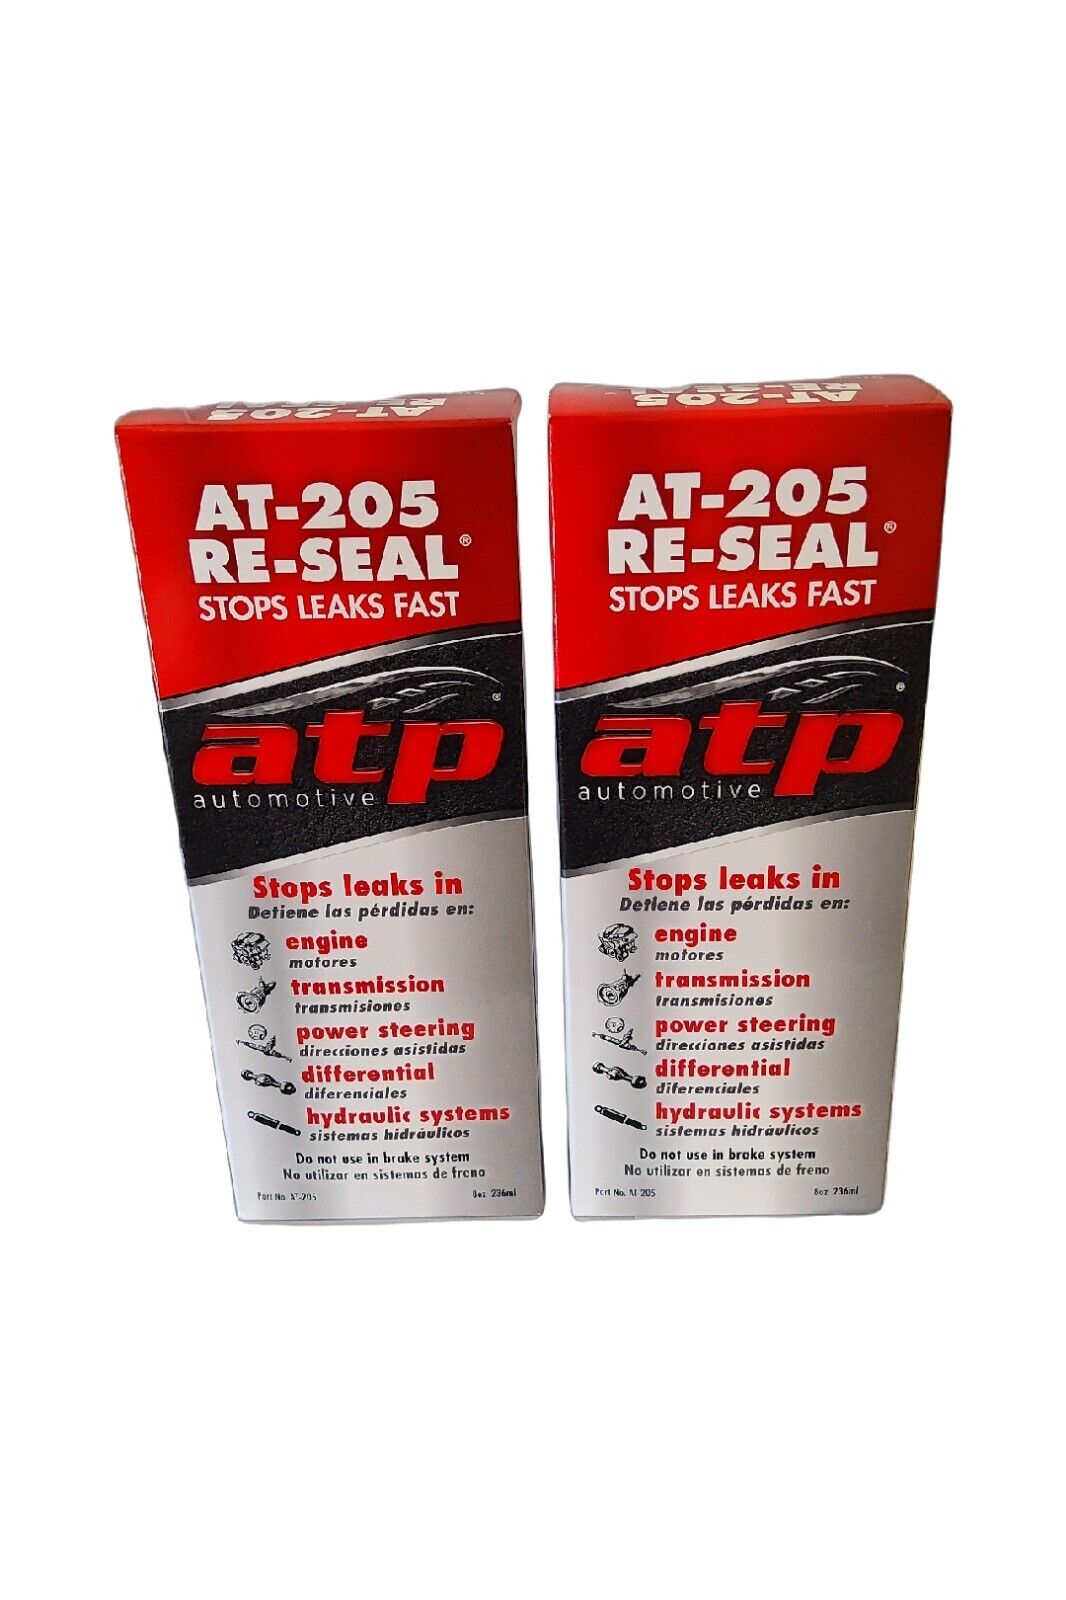 ATP Automotive AT-205 Re-Seal Stops Leaks, 8 Ounce Bottle (2 Pack)